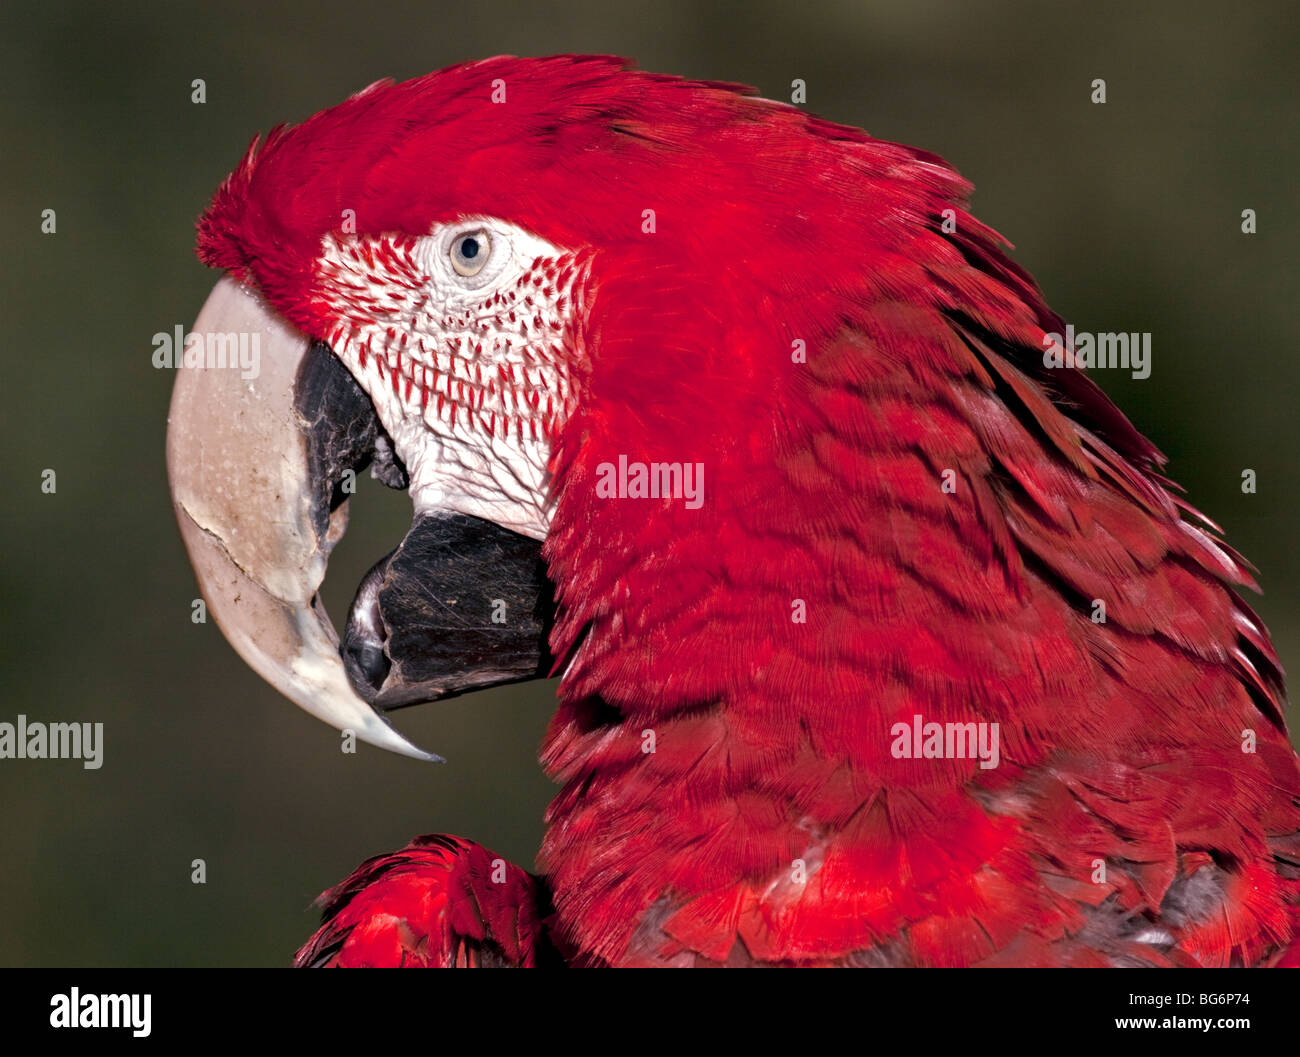 Green Winged Macaw / rosso e verde Macaw (ara chloropterus) Foto Stock